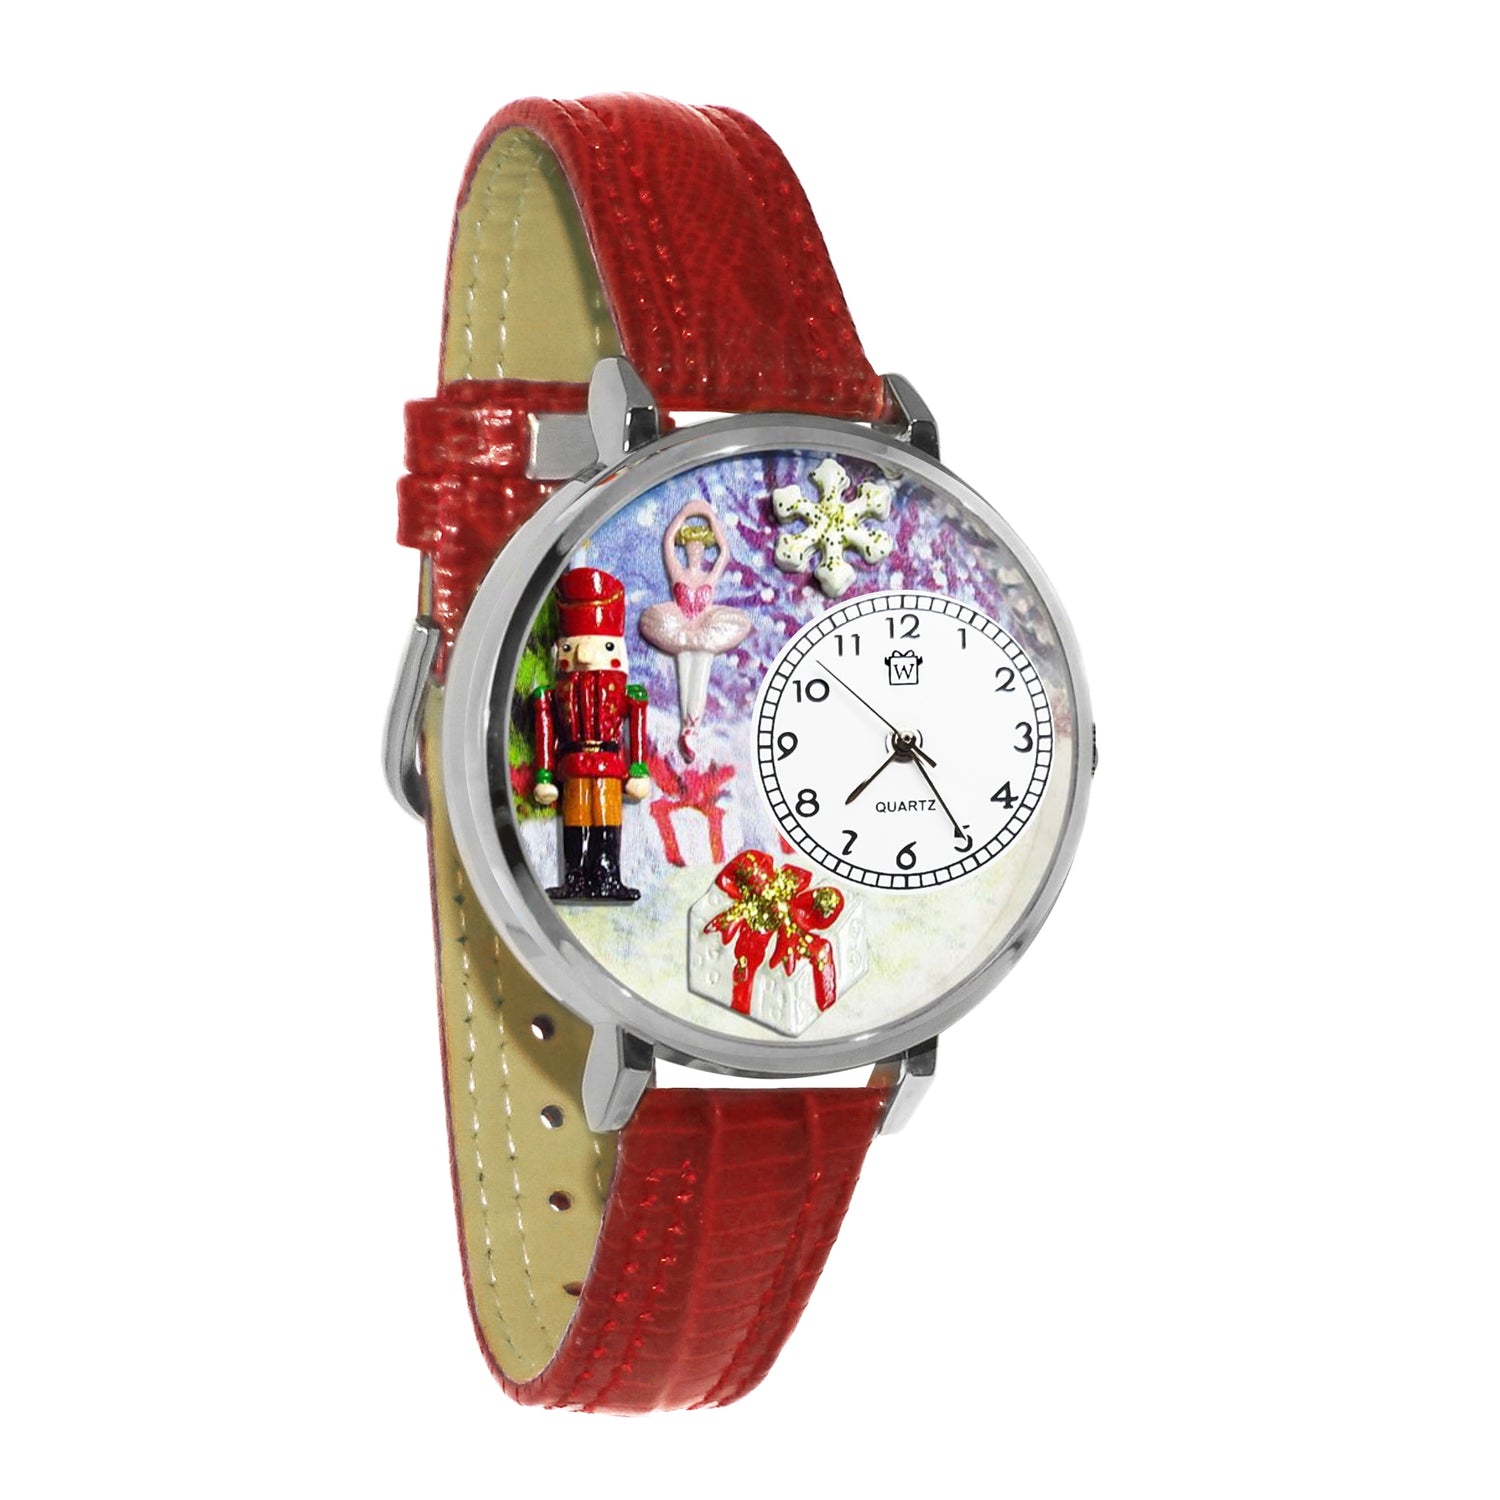 Whimsical Gifts | Nutcracker 3D Watch Large Style | Handmade in USA | Holiday & Seasonal Themed | Christmas | Novelty Unique Fun Miniatures Gift | Silver Finish Red Leather Watch Band